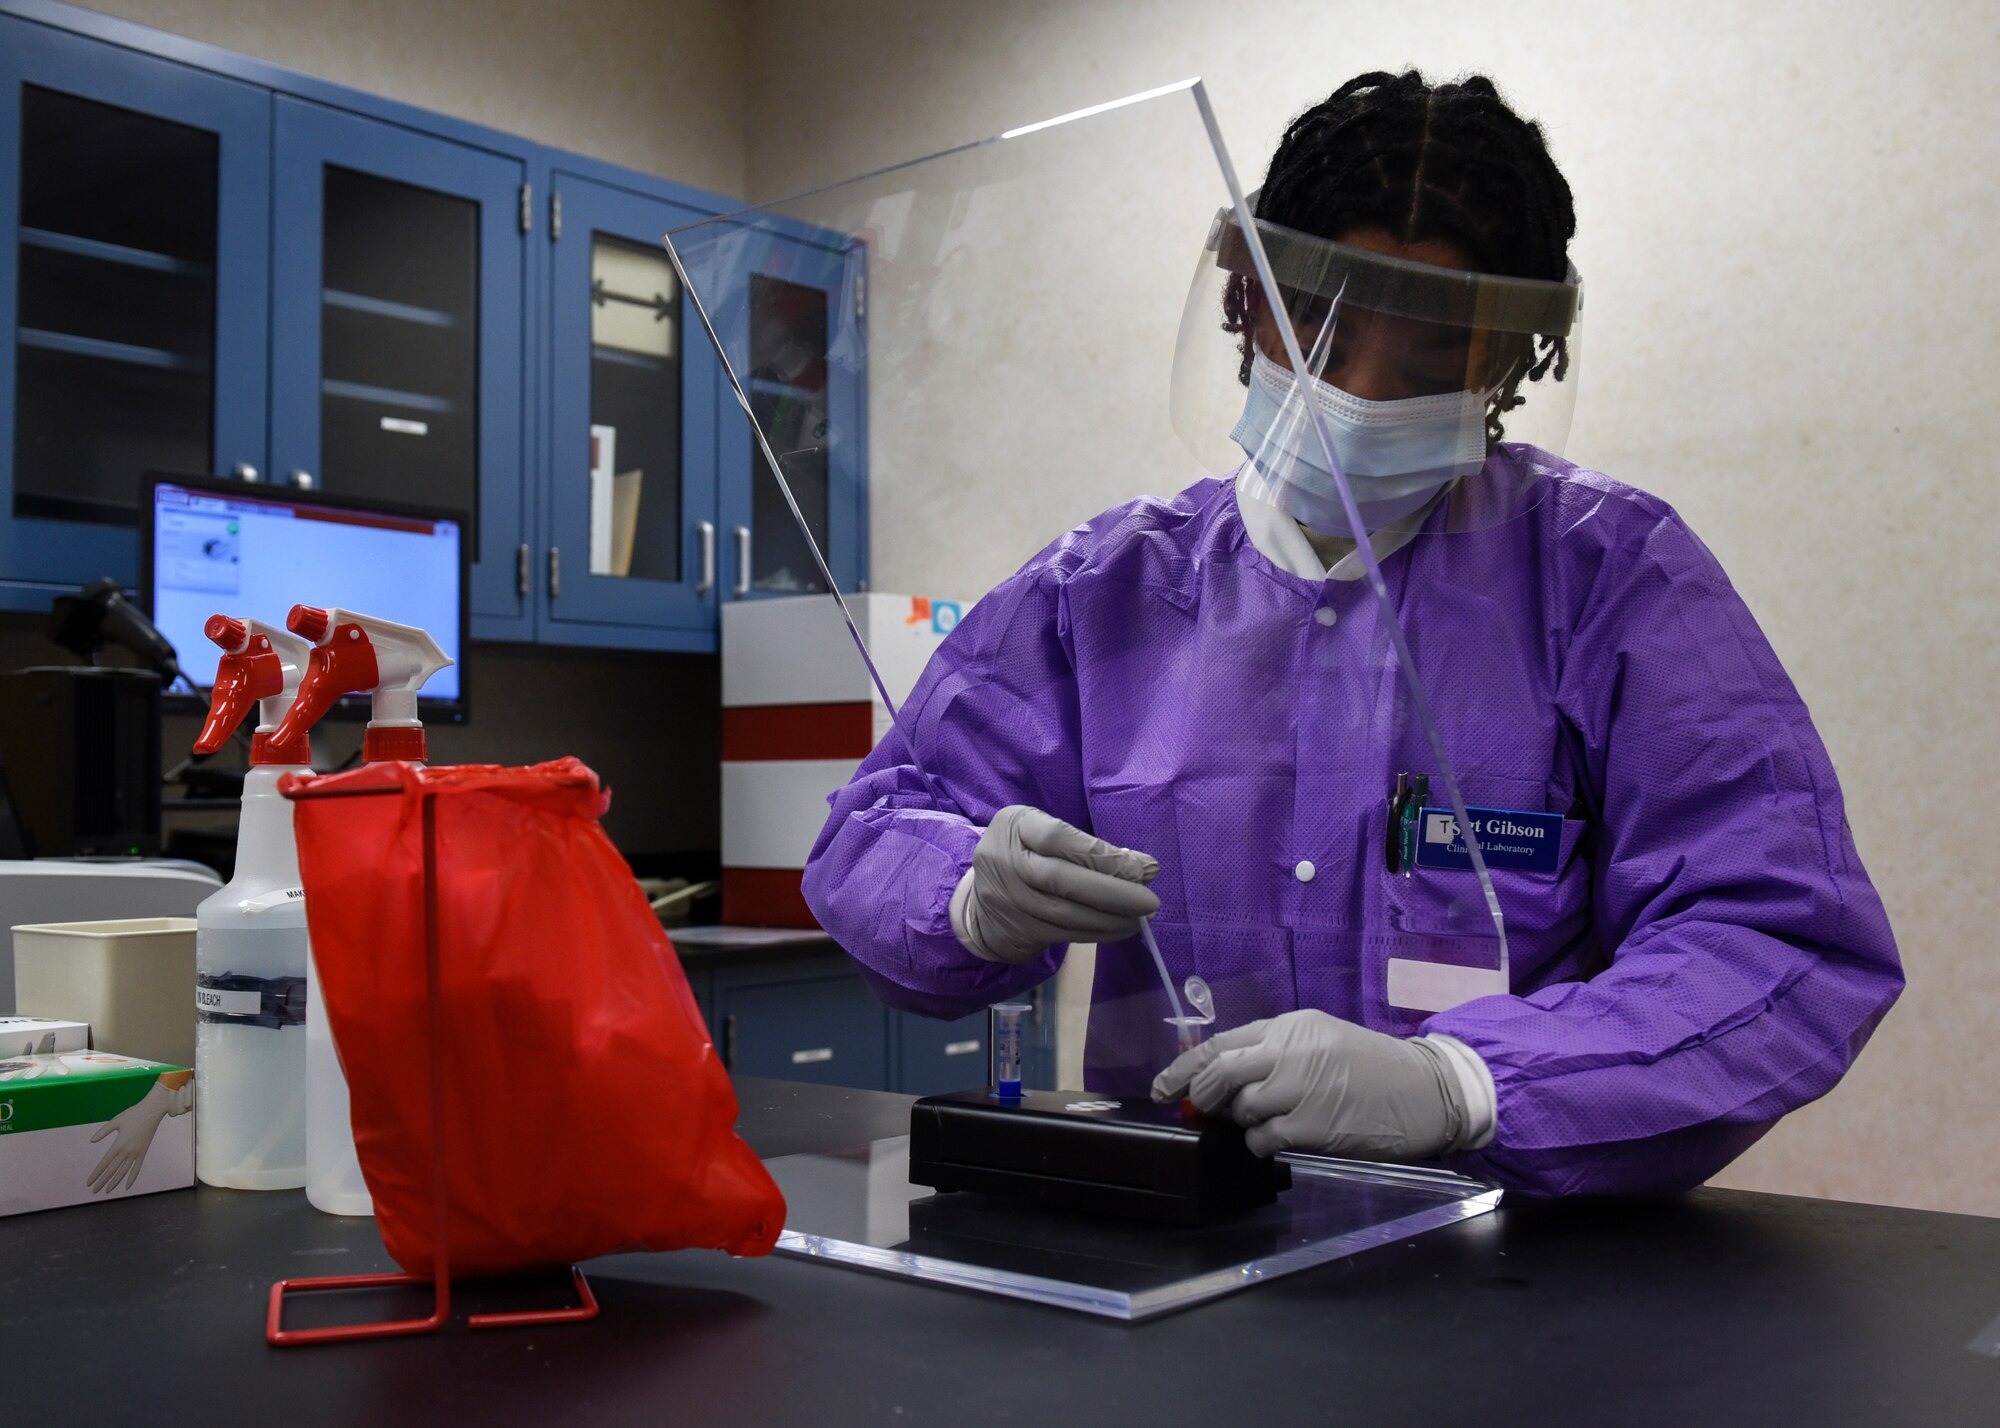 U.S. Air Force Tech. Sgt. Jonisha Gibson, 82nd Medical Group clinical laboratory noncommissioned officer in charge, prepares a sample for testing at Sheppard Air Force Base, Texas, April 9, 2020. Gibson will inject the patient’s sample into a FilmArray pouch that can be analyzed and tested on a molecular level. (U.S. Air Force photo by Senior Airman Pedro Tenorio)